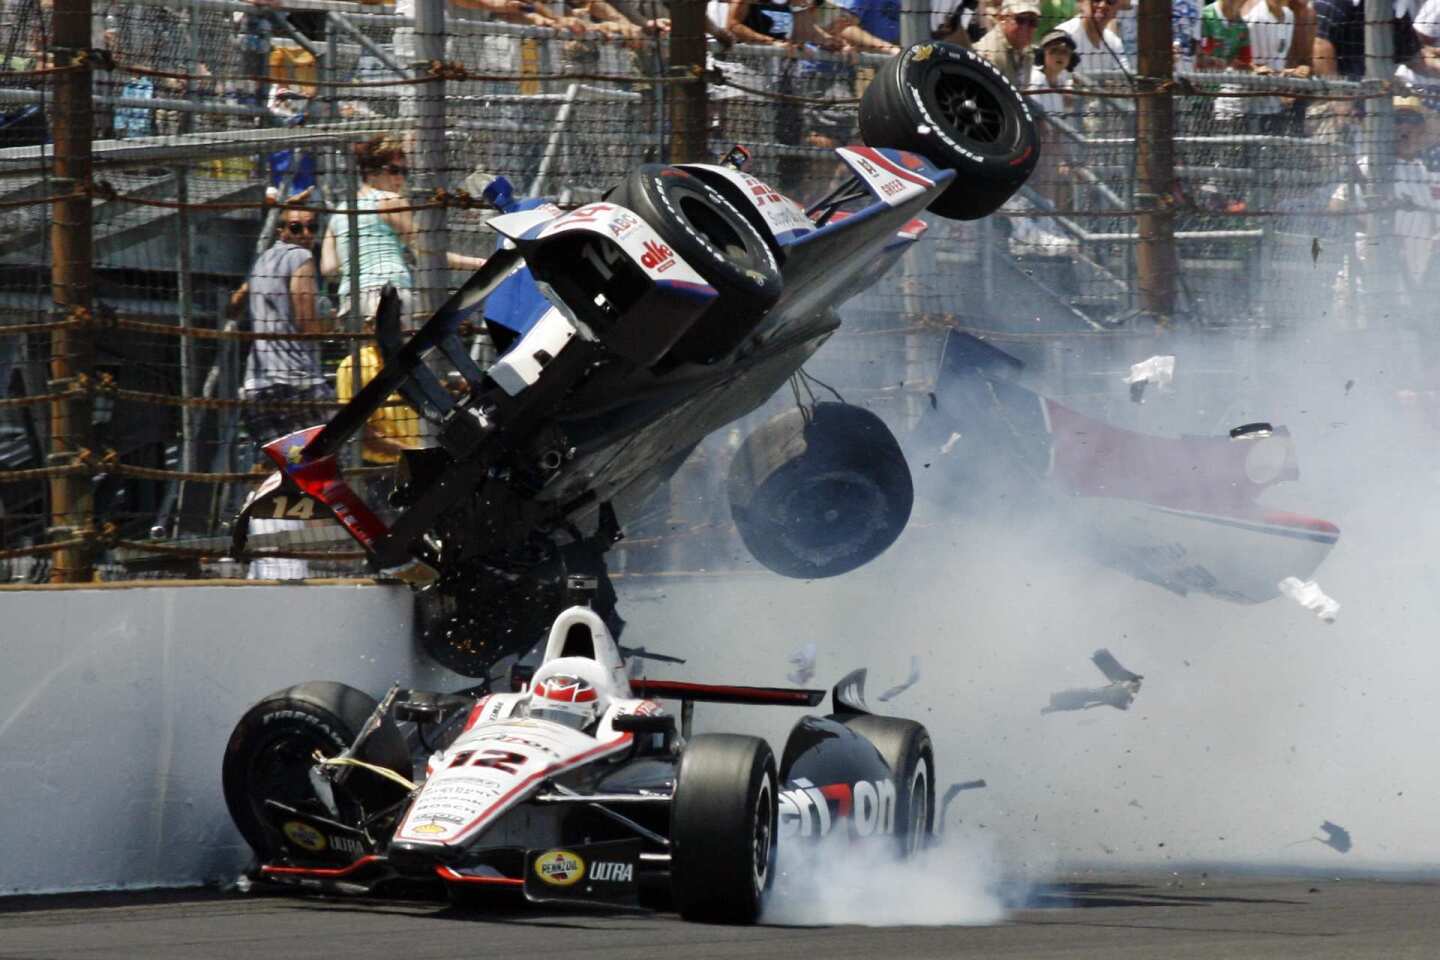 The car of driver Mike Conway goes airborne as it collides with the car of Will Power in the first turn on Sunday during the Indianapolis 500.